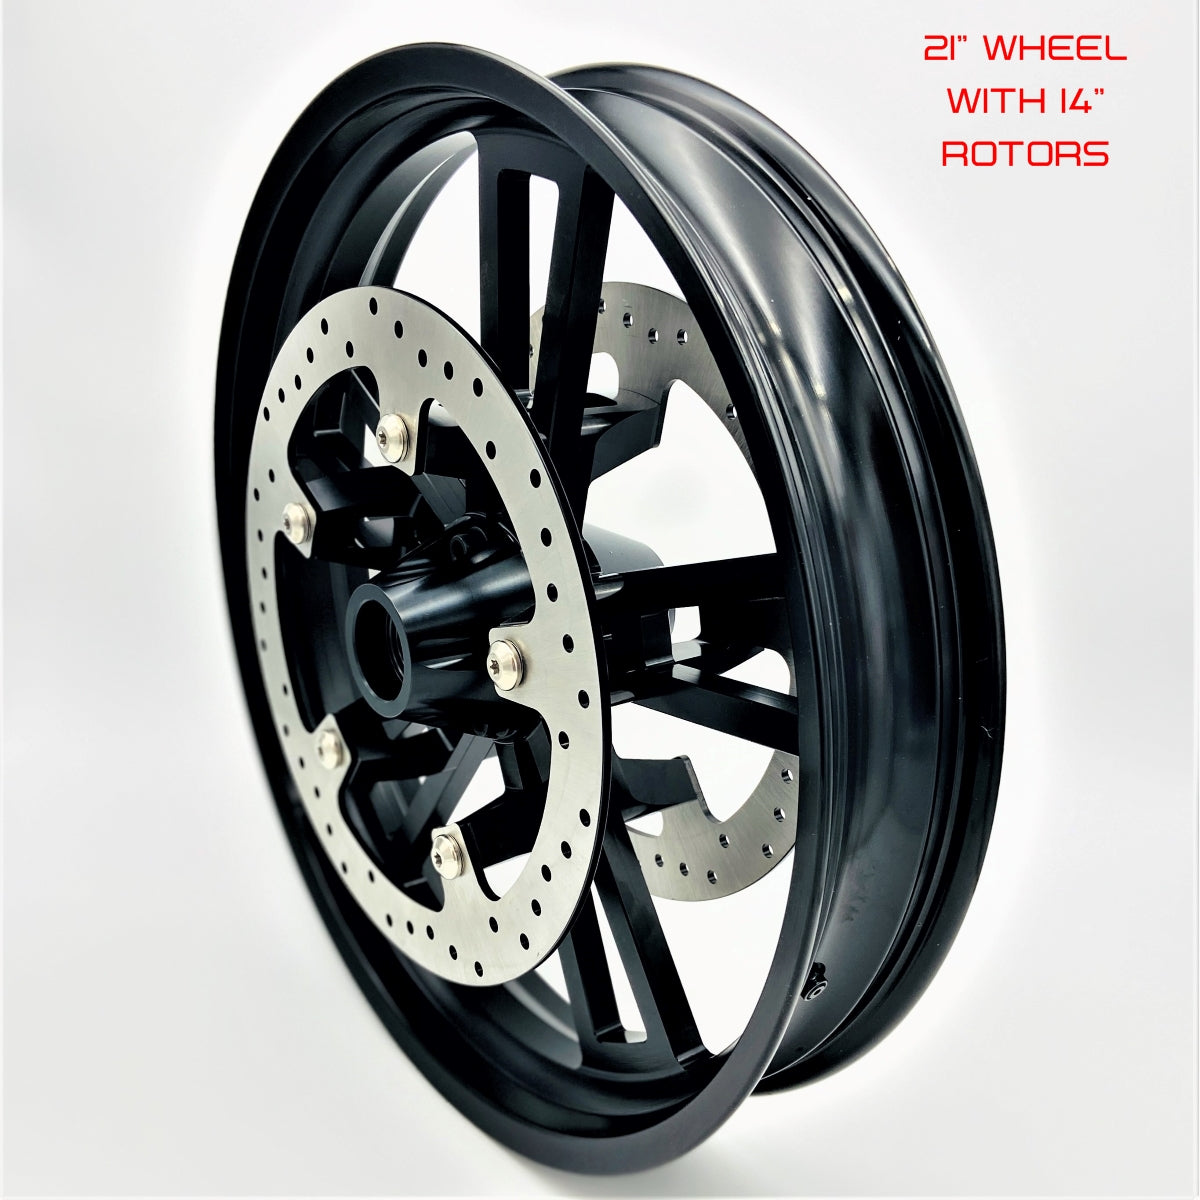 GeezerEngineering 19" or 21" front wheel contains a 90 degree angled valve for Harley